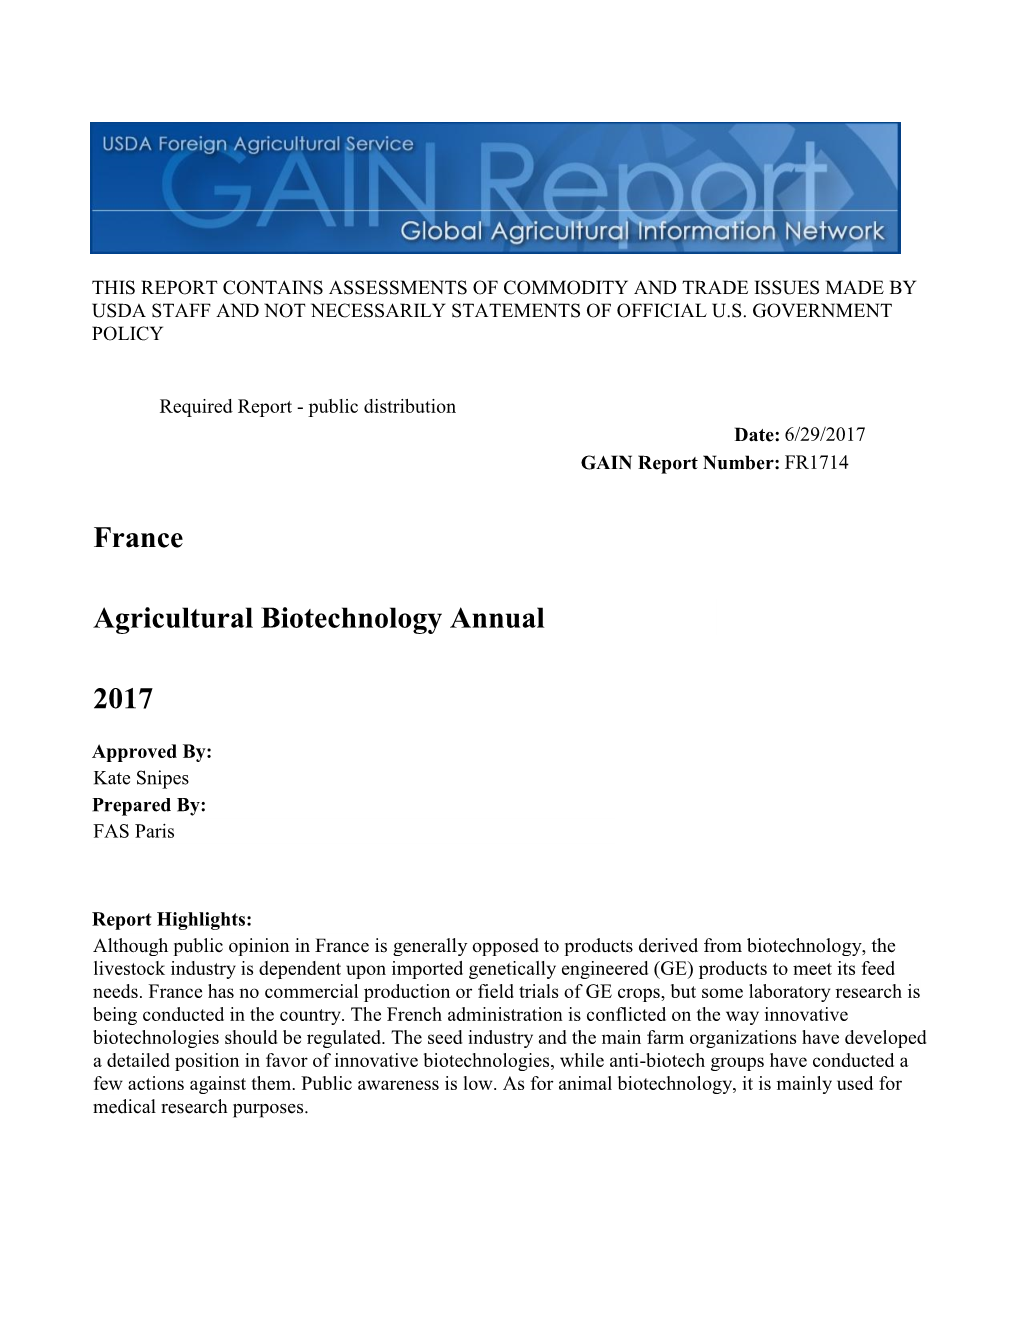 2017 Agricultural Biotechnology Annual France